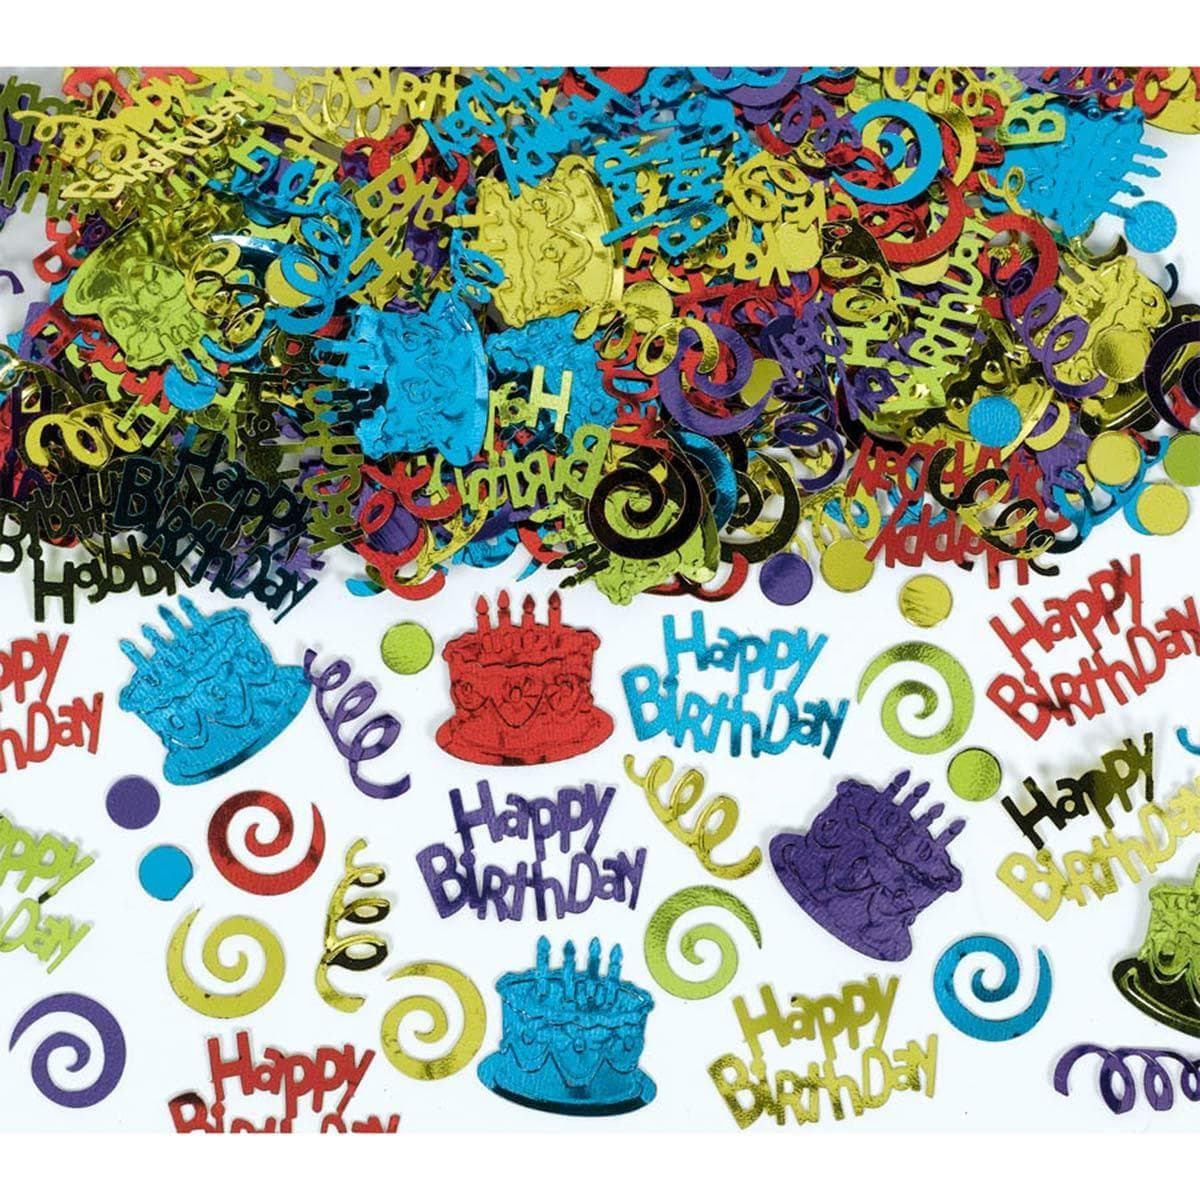 Buy Decorations Assorted Confetti For Birthday sold at Party Expert